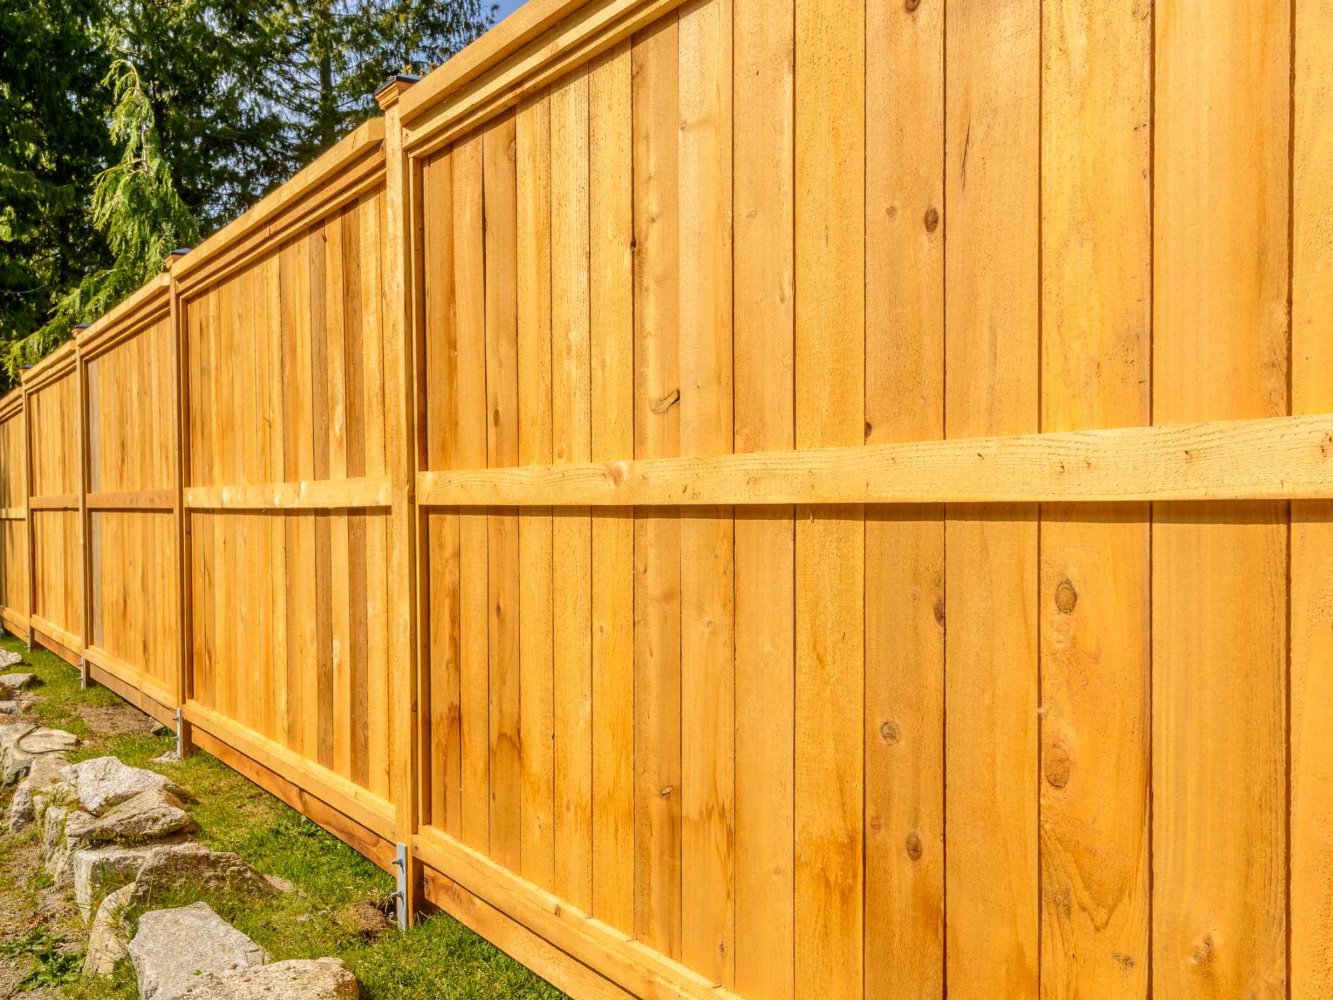 Strafford MO cap and trim style wood fence